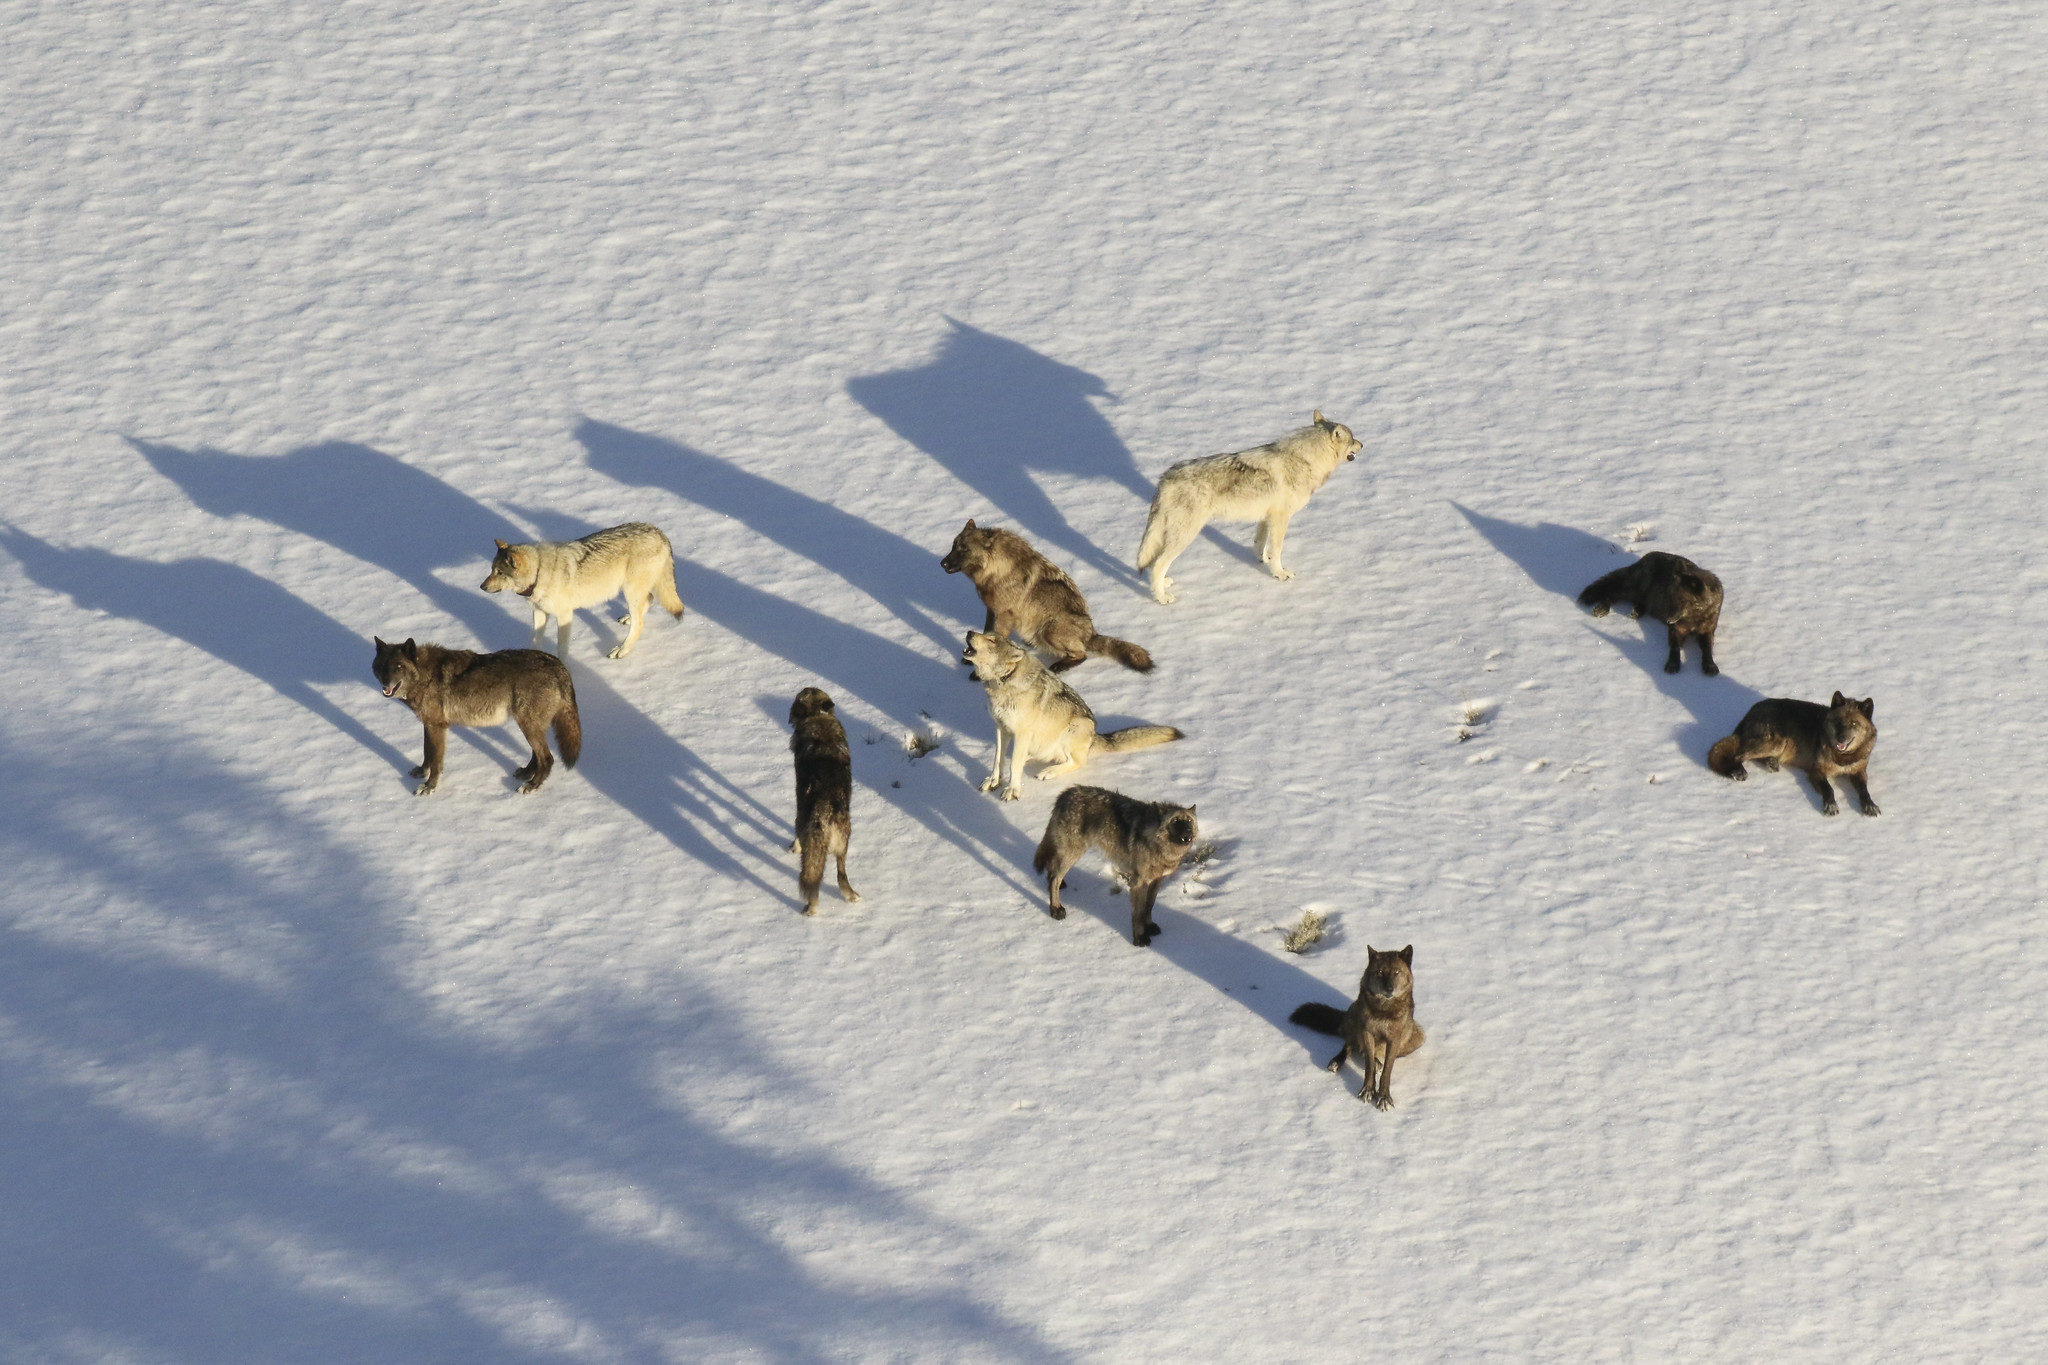 pack of wolves on a snowy landscape